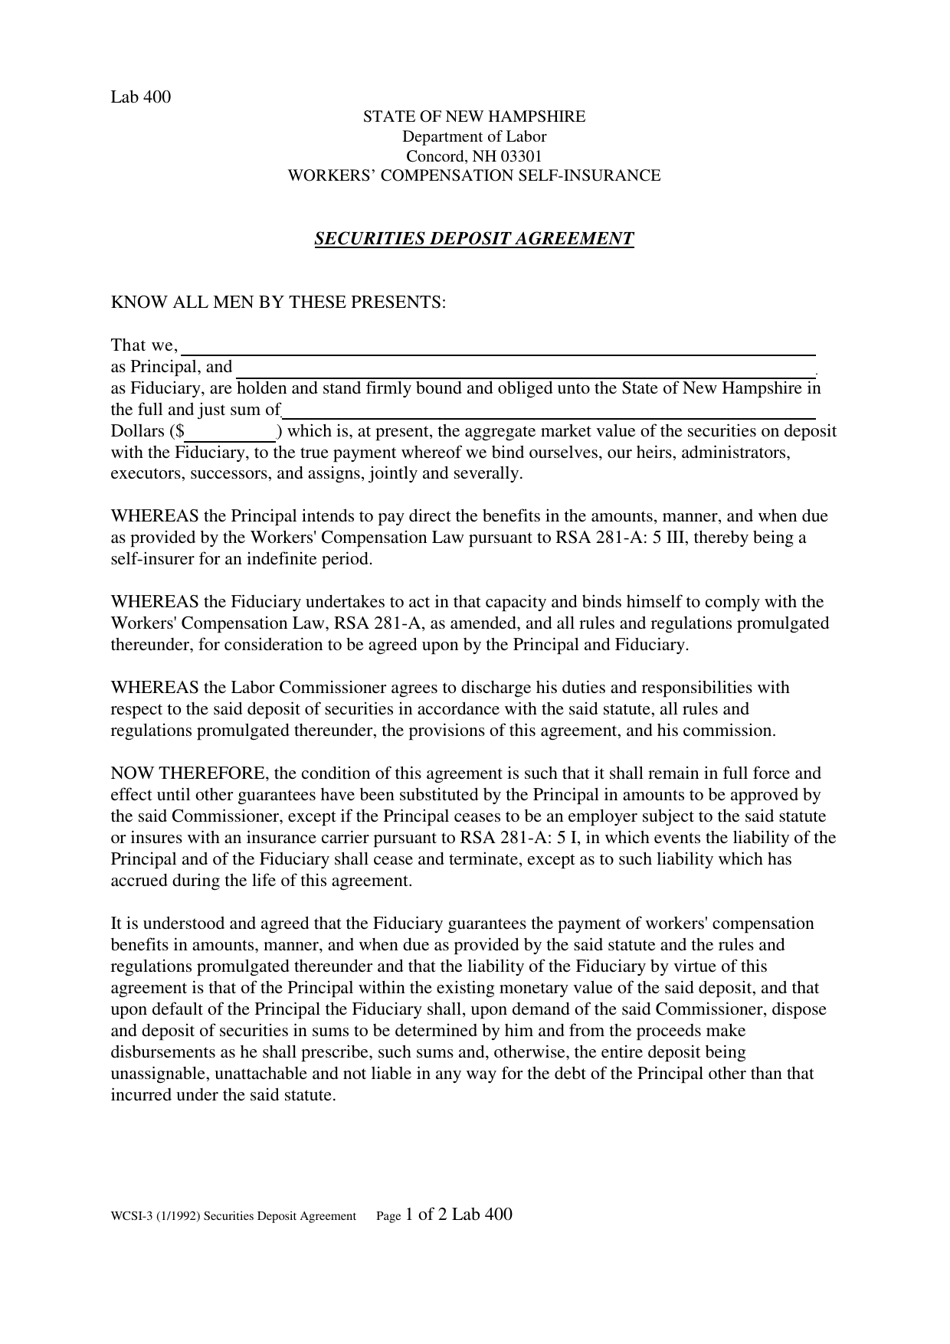 Form LAB400 (WCSI-3) Securities Deposit Agreement - New Hampshire, Page 1